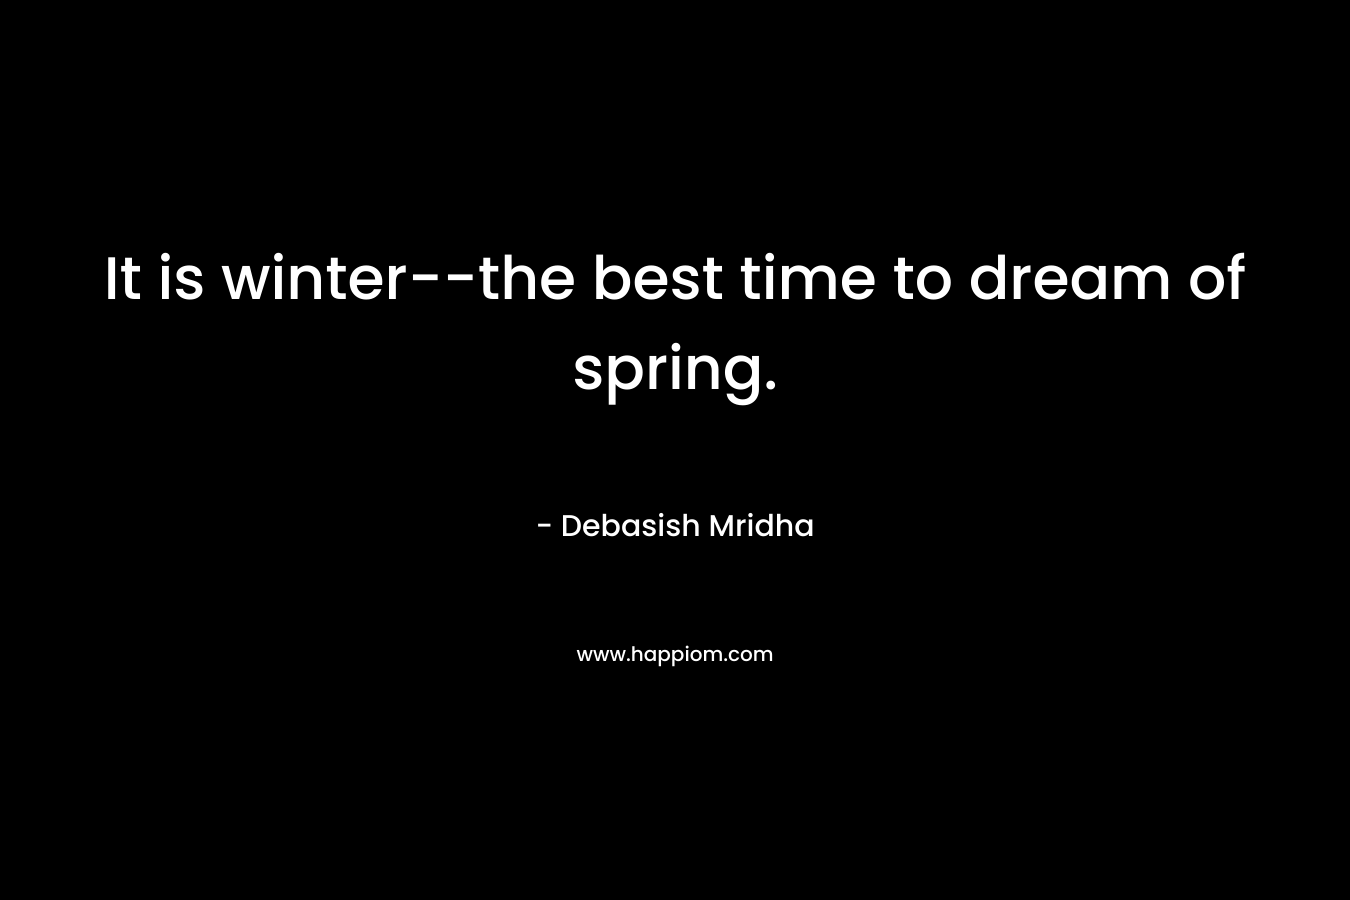 It is winter--the best time to dream of spring.